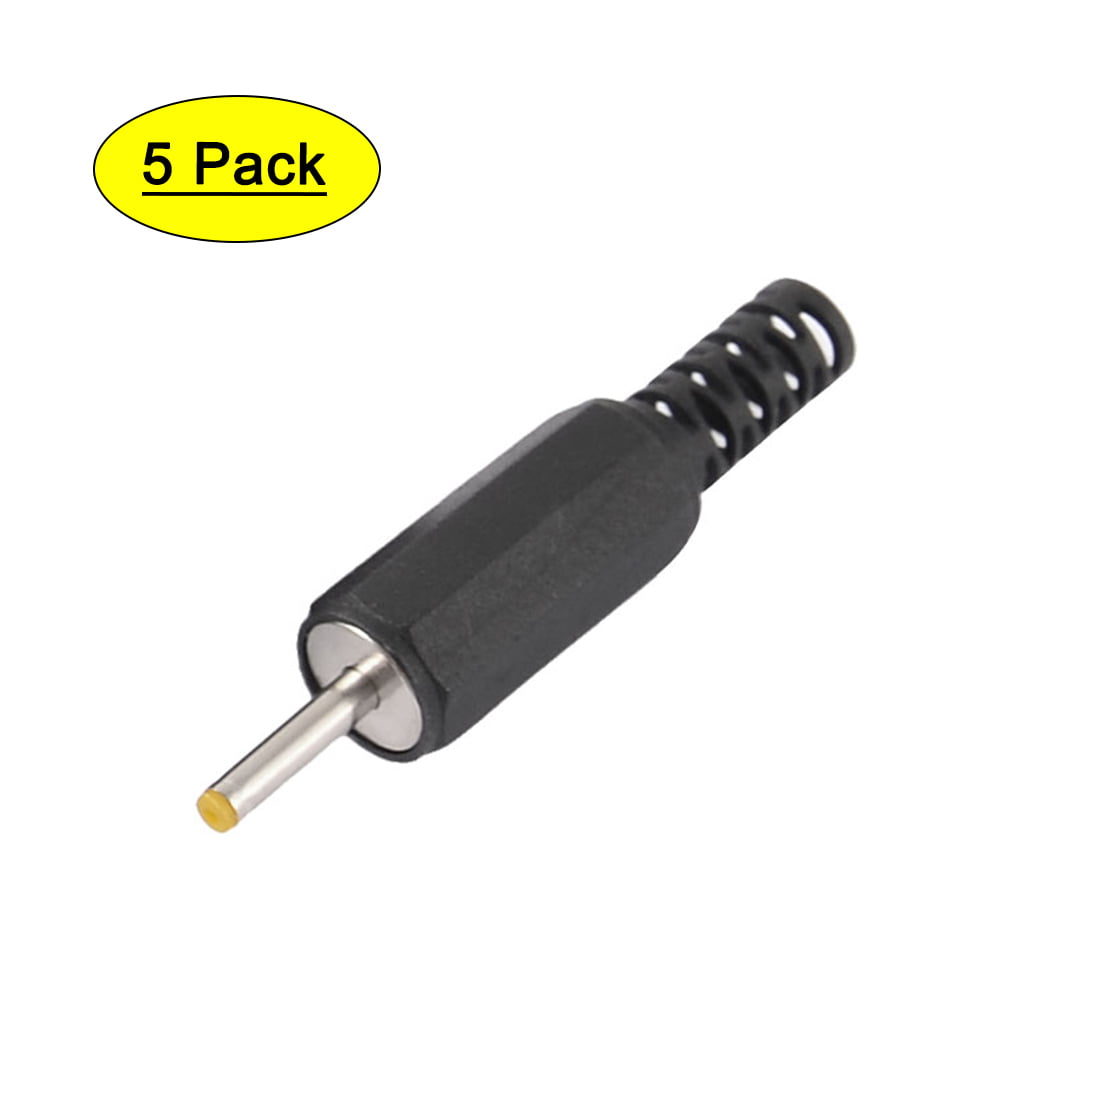 1x New 4.8x1.7mm DC Power Male Plug Connector Adapter Plastic Handle Yellow Head 